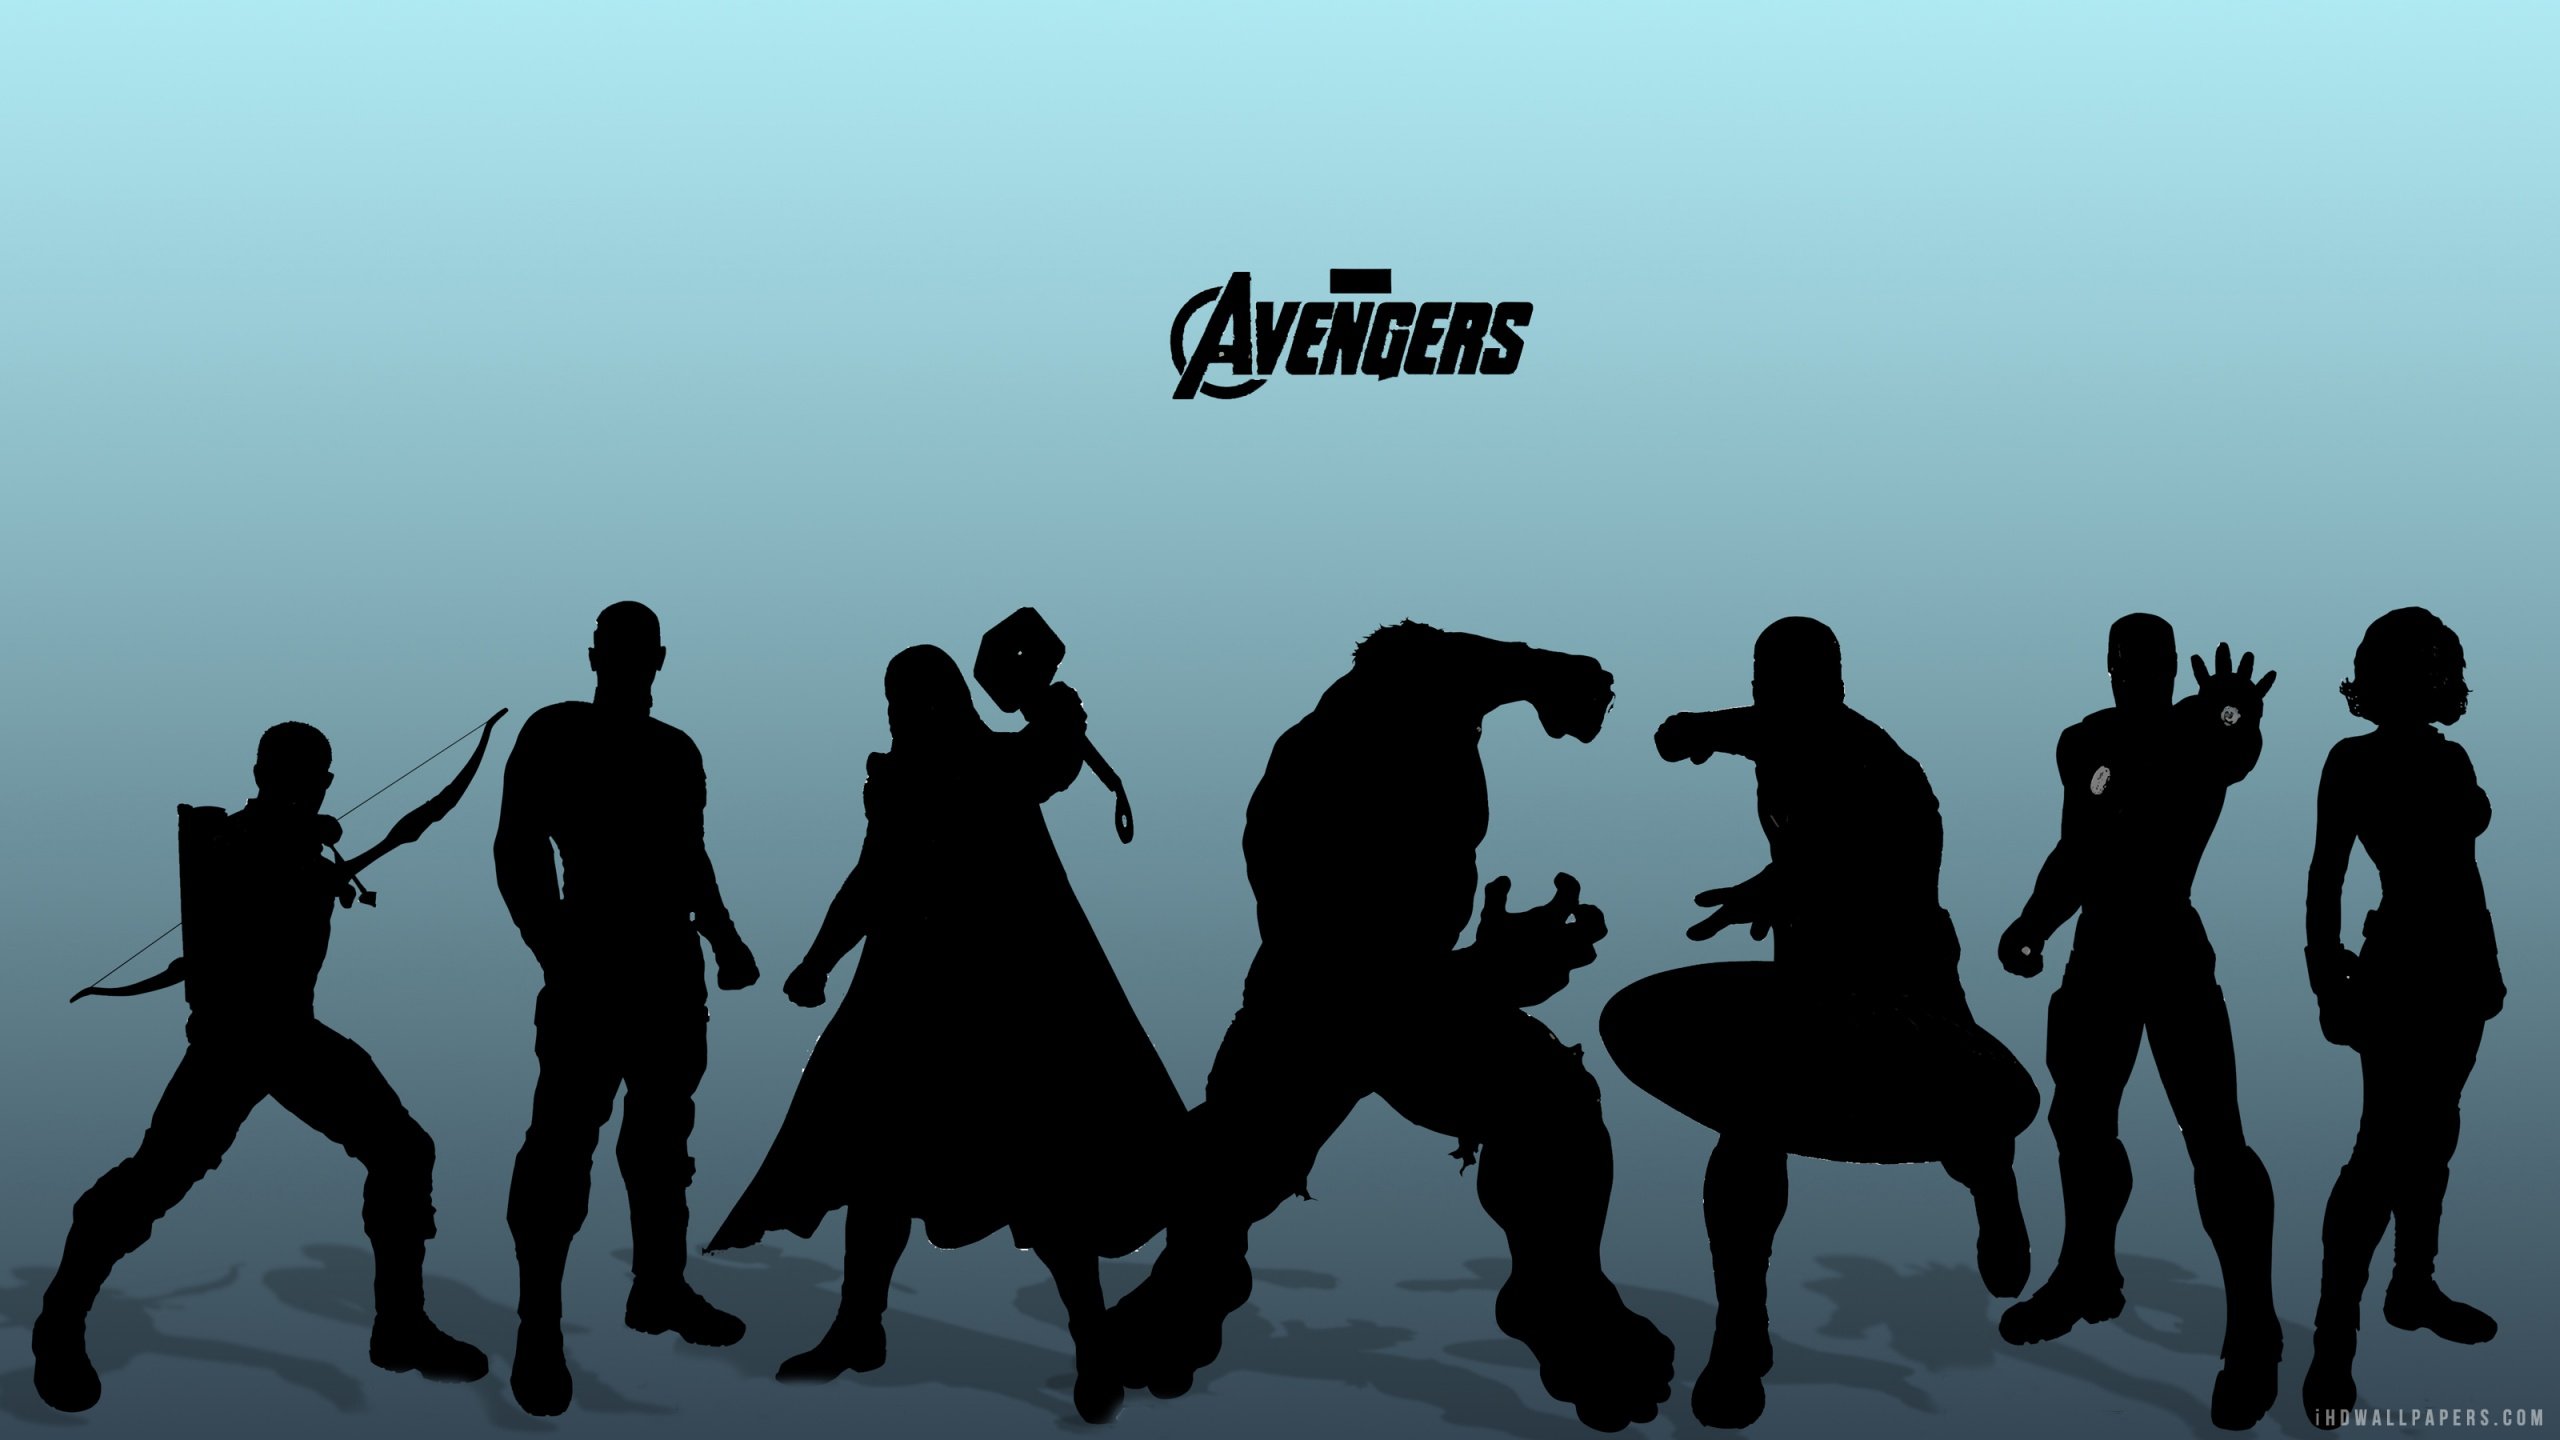 Free download Avengers Superheroes HD Wide Wallpaper 2560x1440 Resolution [2560x1440] for your Desktop, Mobile & Tablet. Explore Superhero HD Wallpaper. Super HD Wallpaper, X Men Wallpaper, Marvel Comics Wallpaper